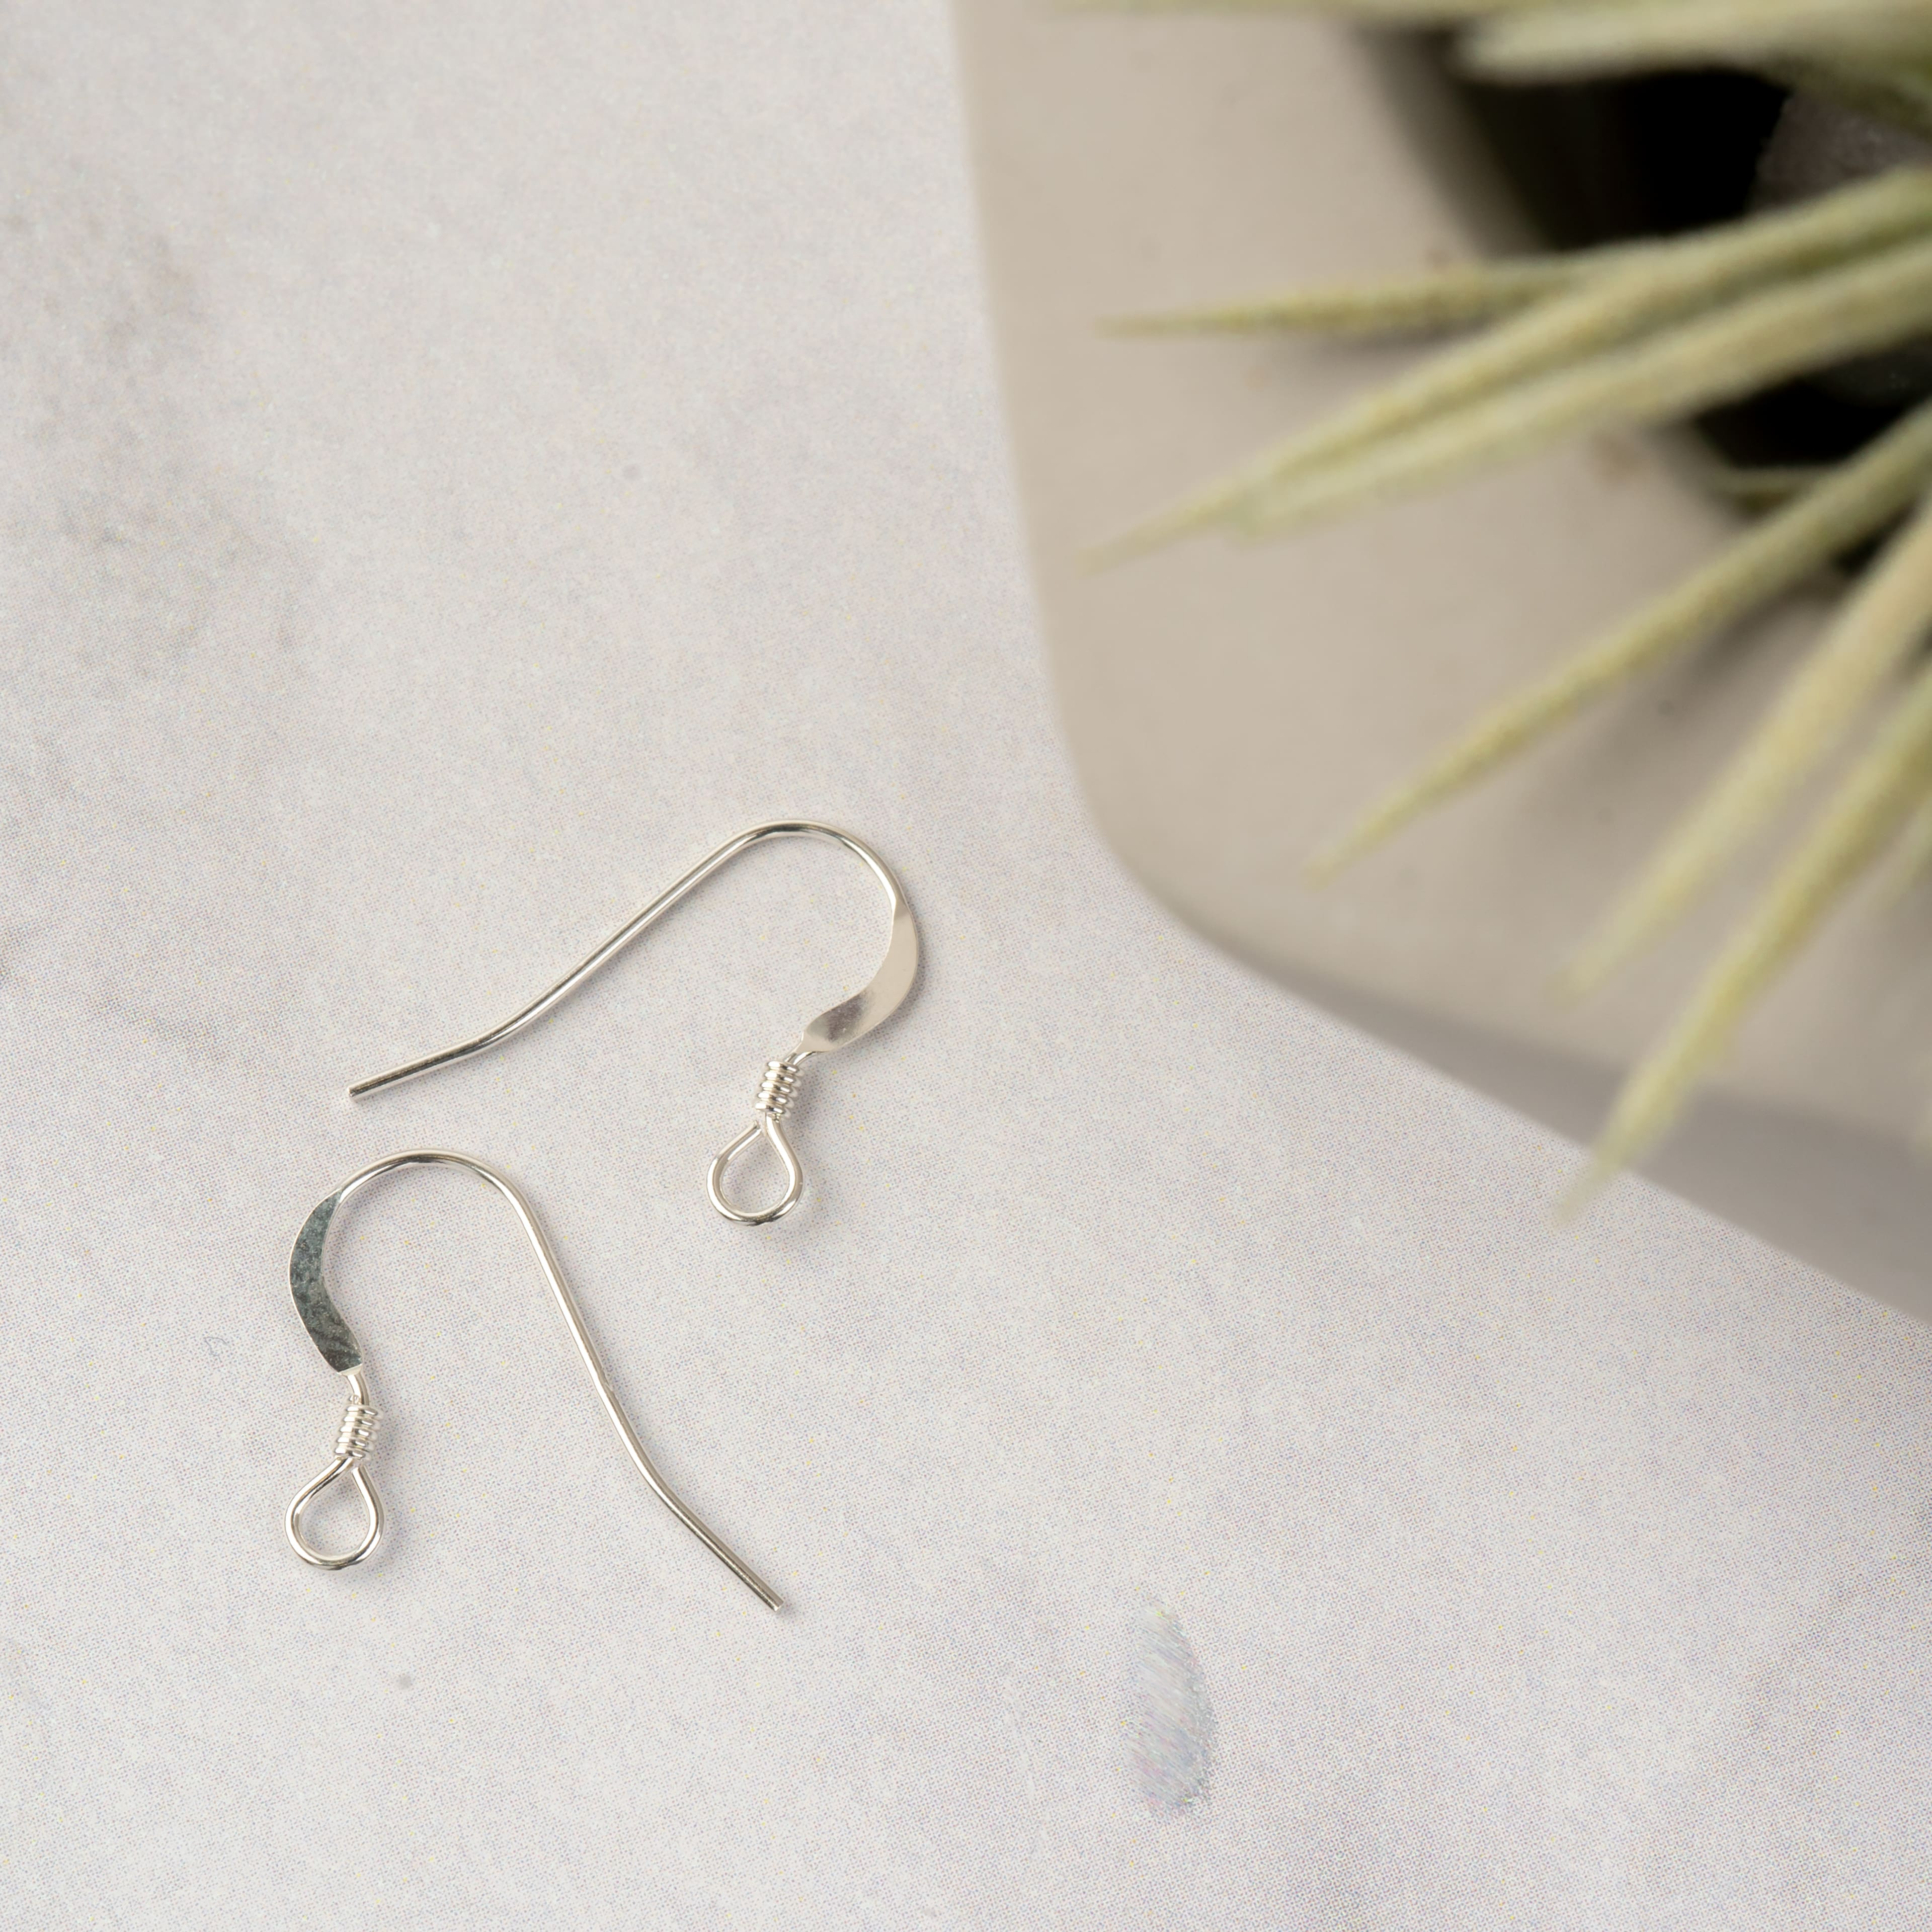 12mm Sterling Silver Fish Hook Ear Wires, 2ct. by Bead Landing | Michaels